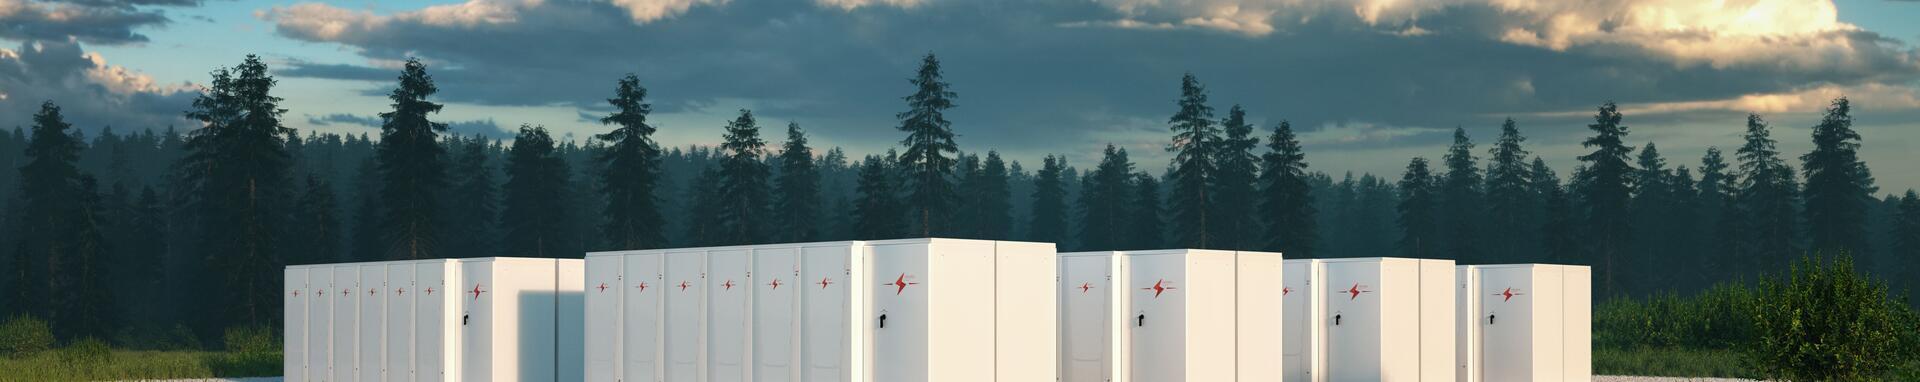 CIF at Forefront of Energy Storage Solution Frontier in the Fight Against Climate Change